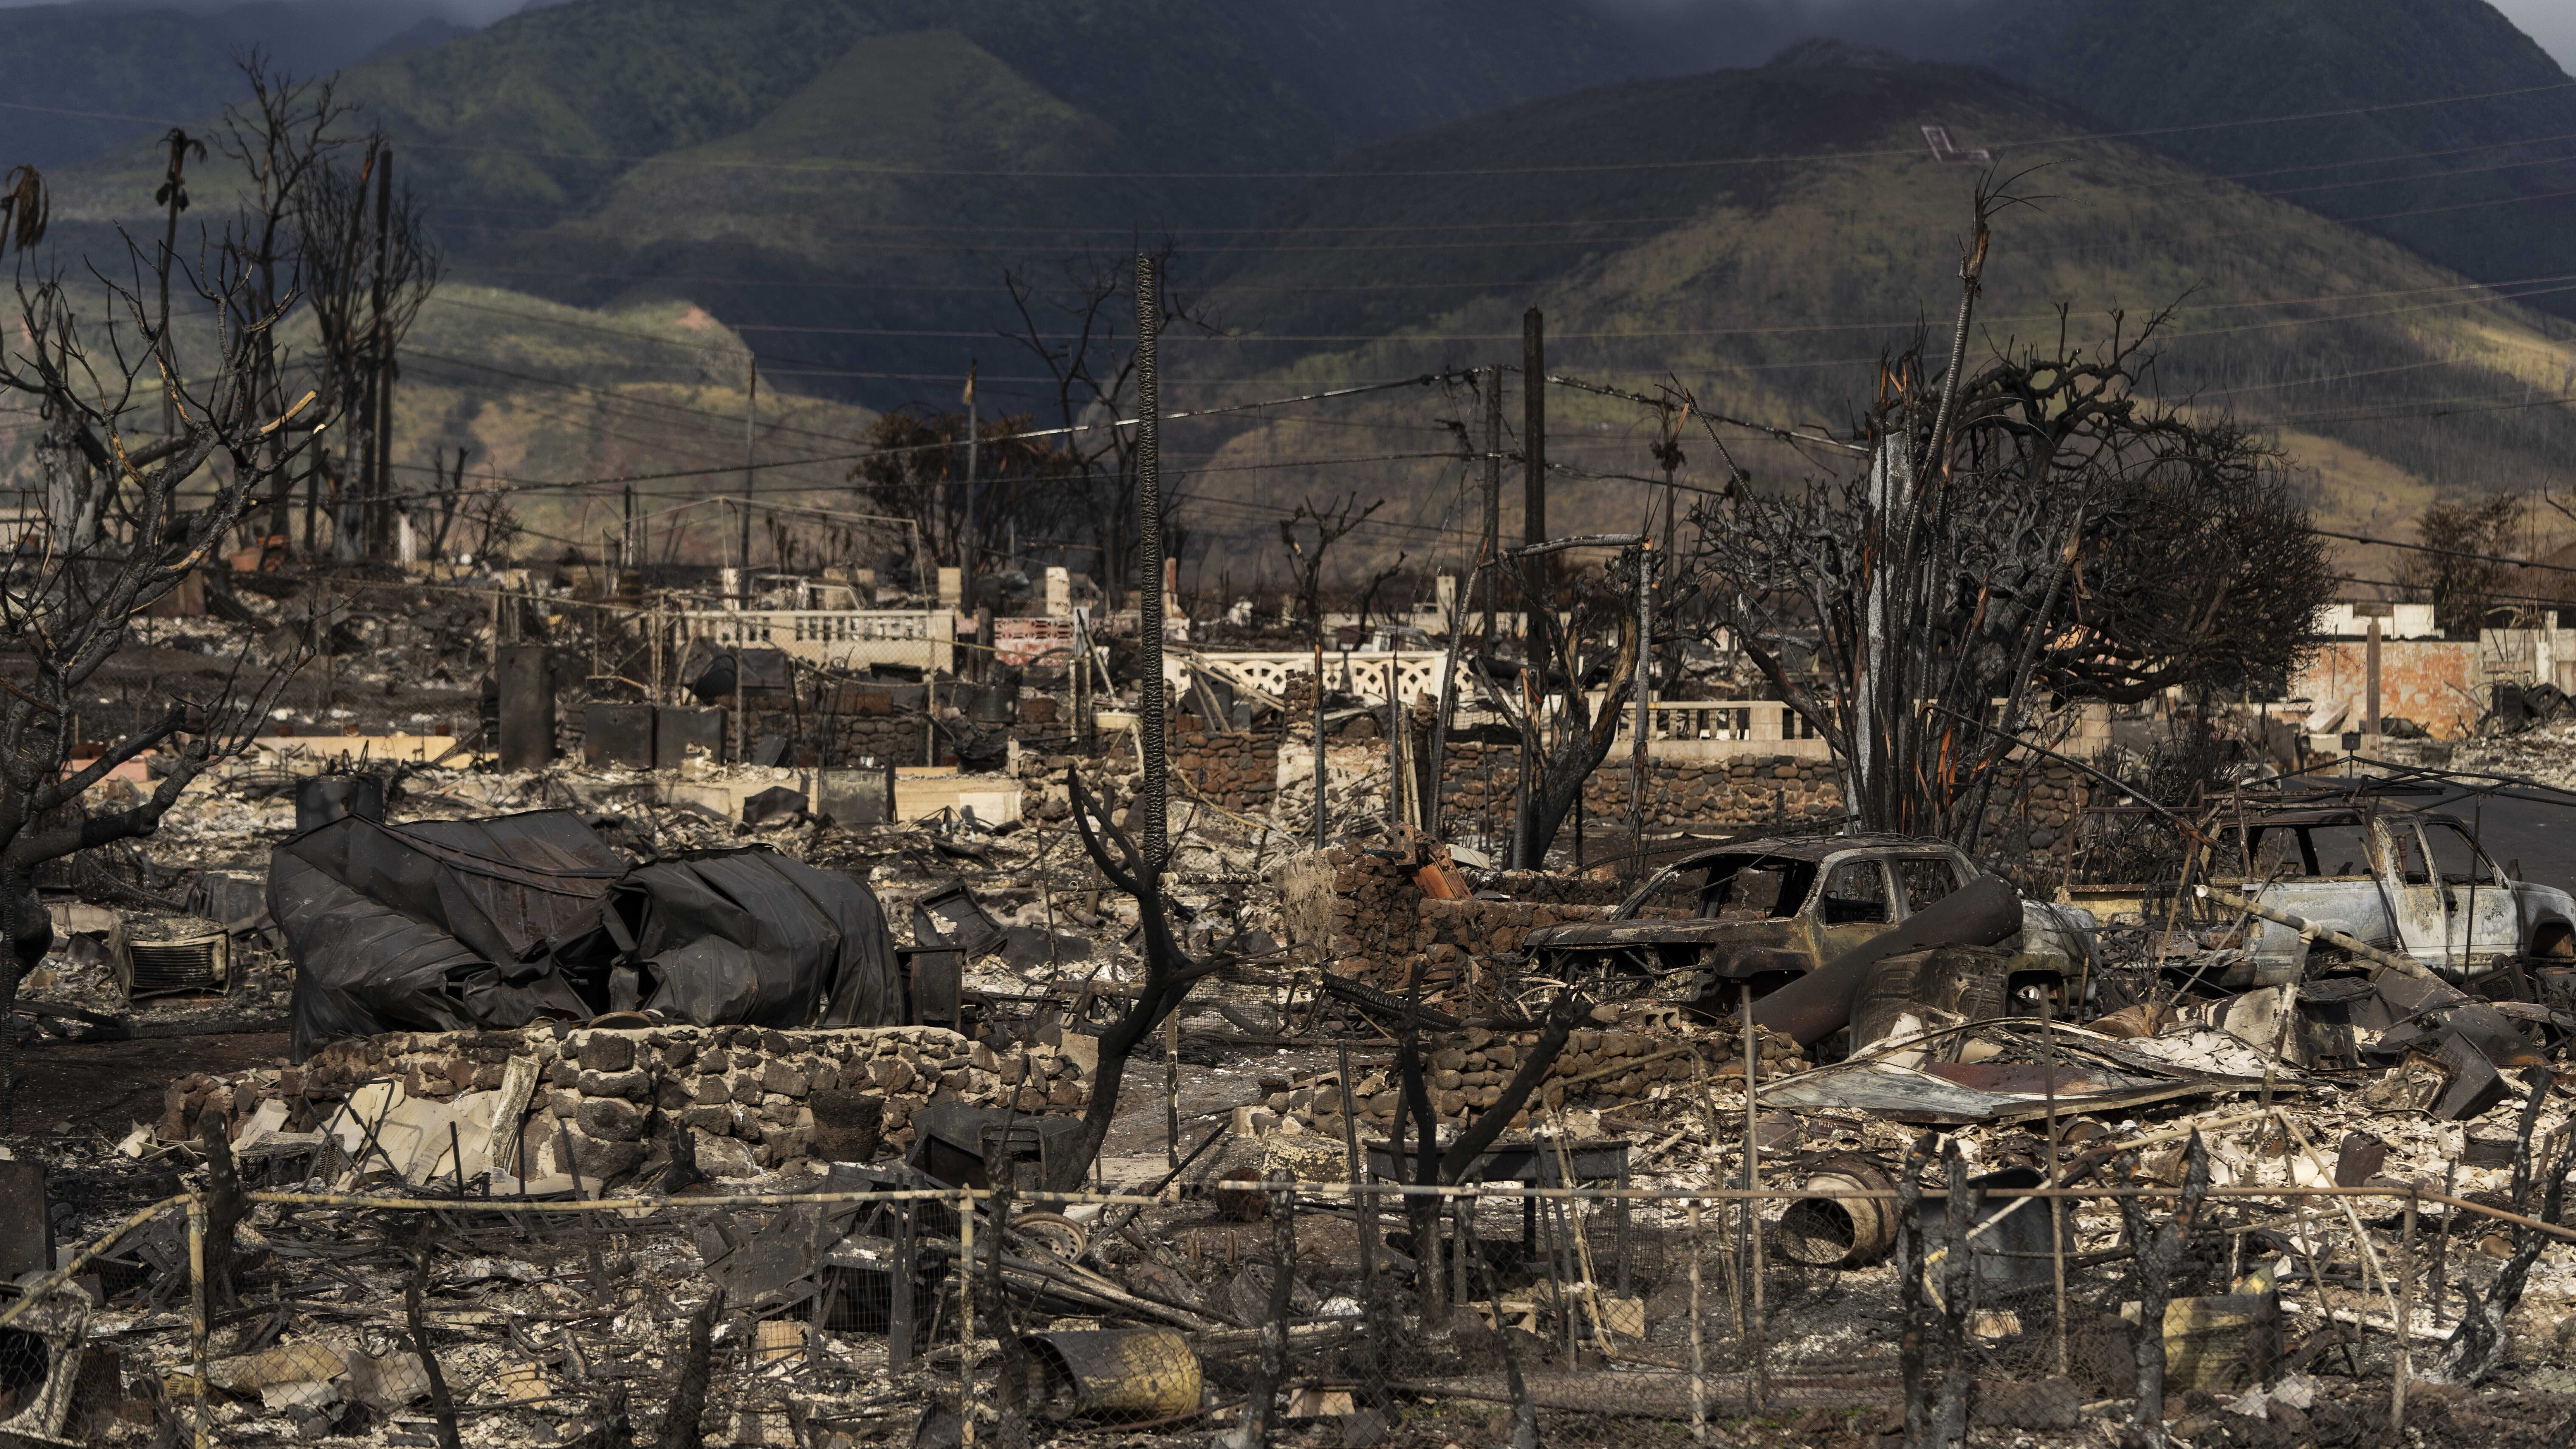 (CNN) — The number of people who died in the massive wildfires that torched parts of Maui last m...